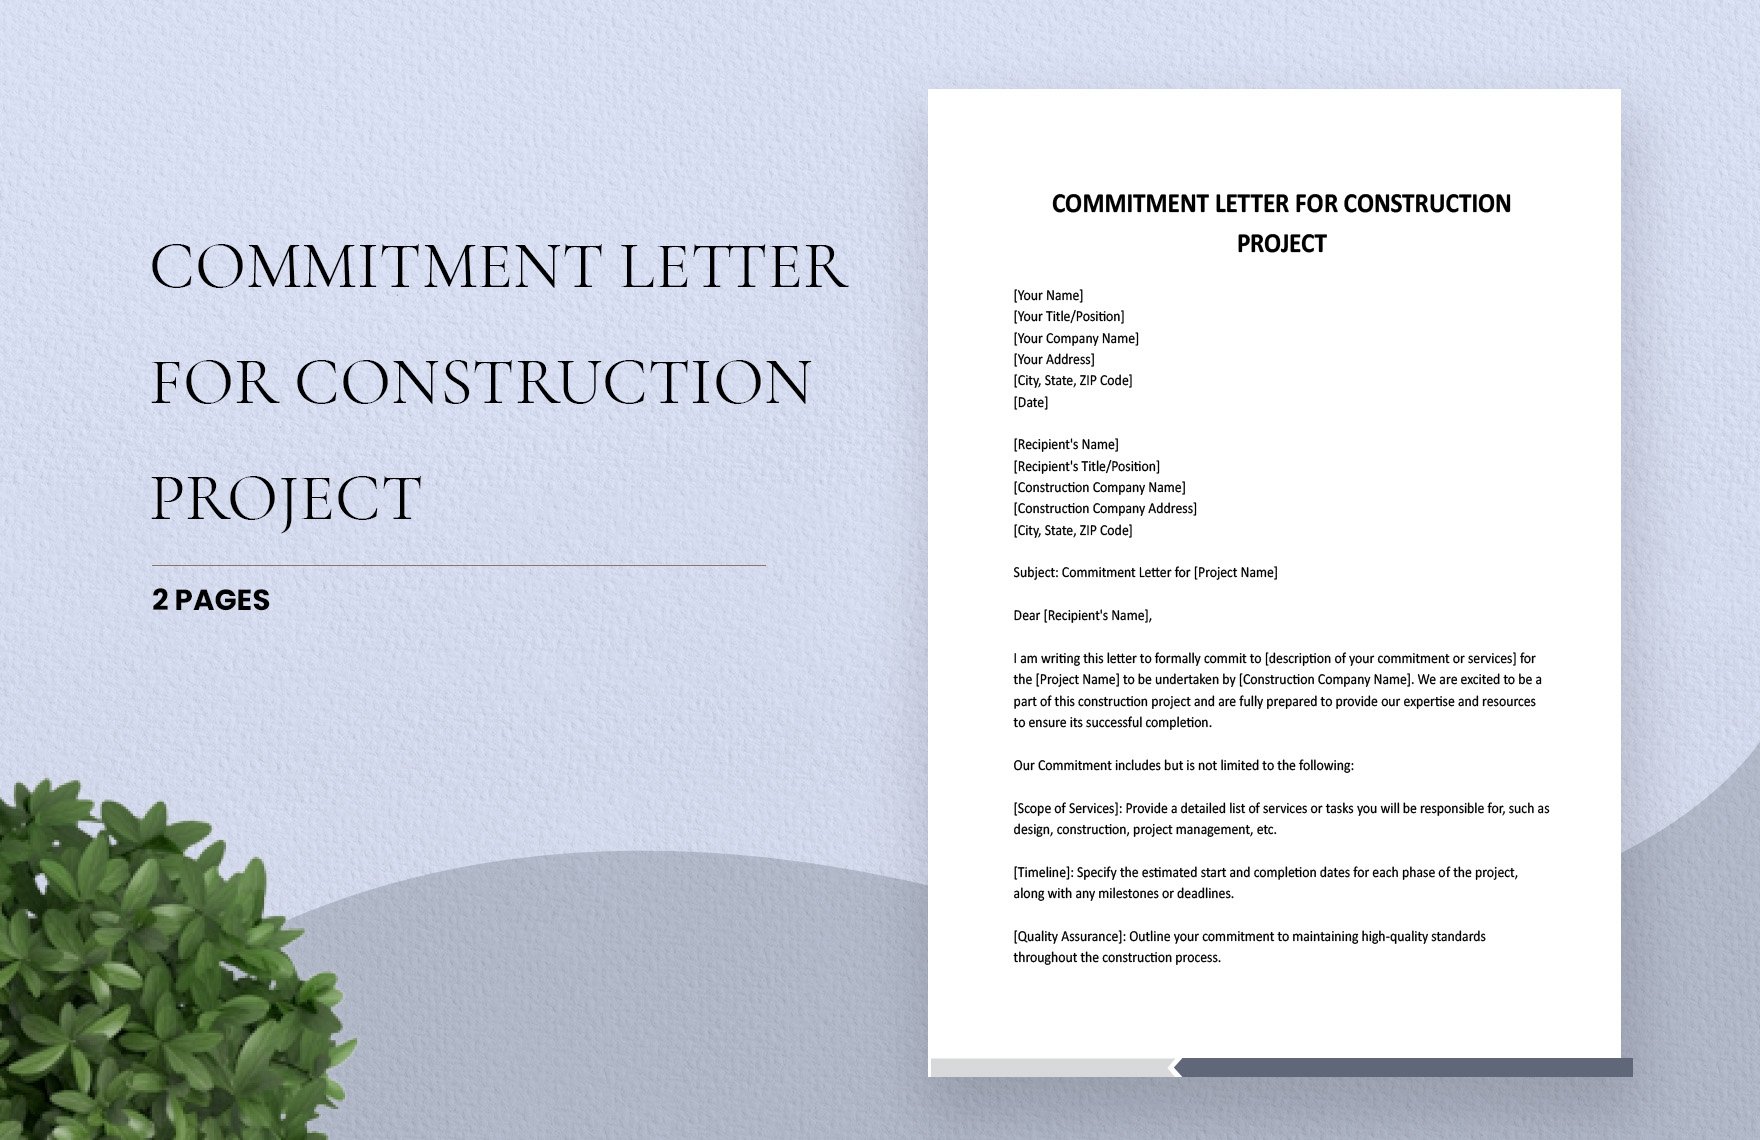 Commitment Letter For Construction Project